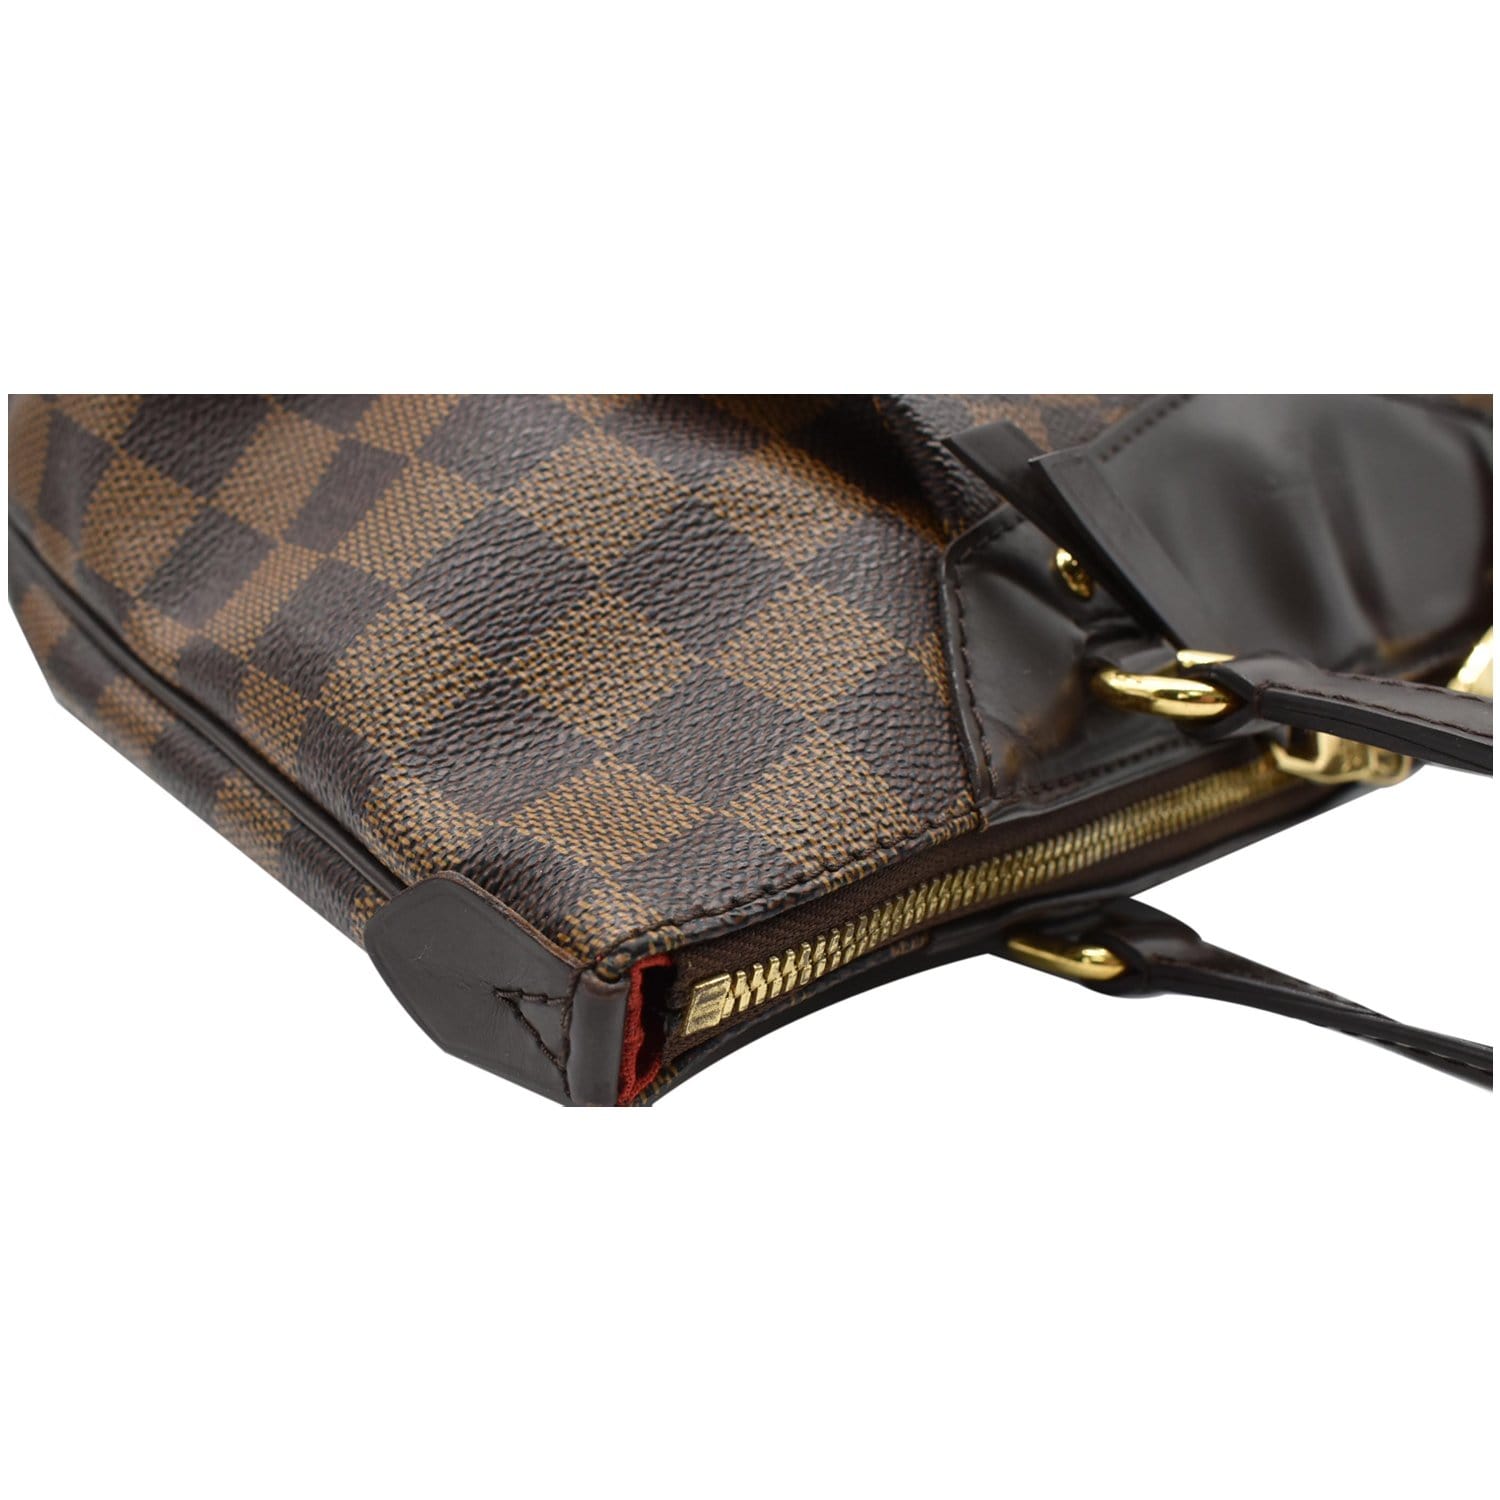 Westminster leather handbag Louis Vuitton Brown in Leather - 31346926